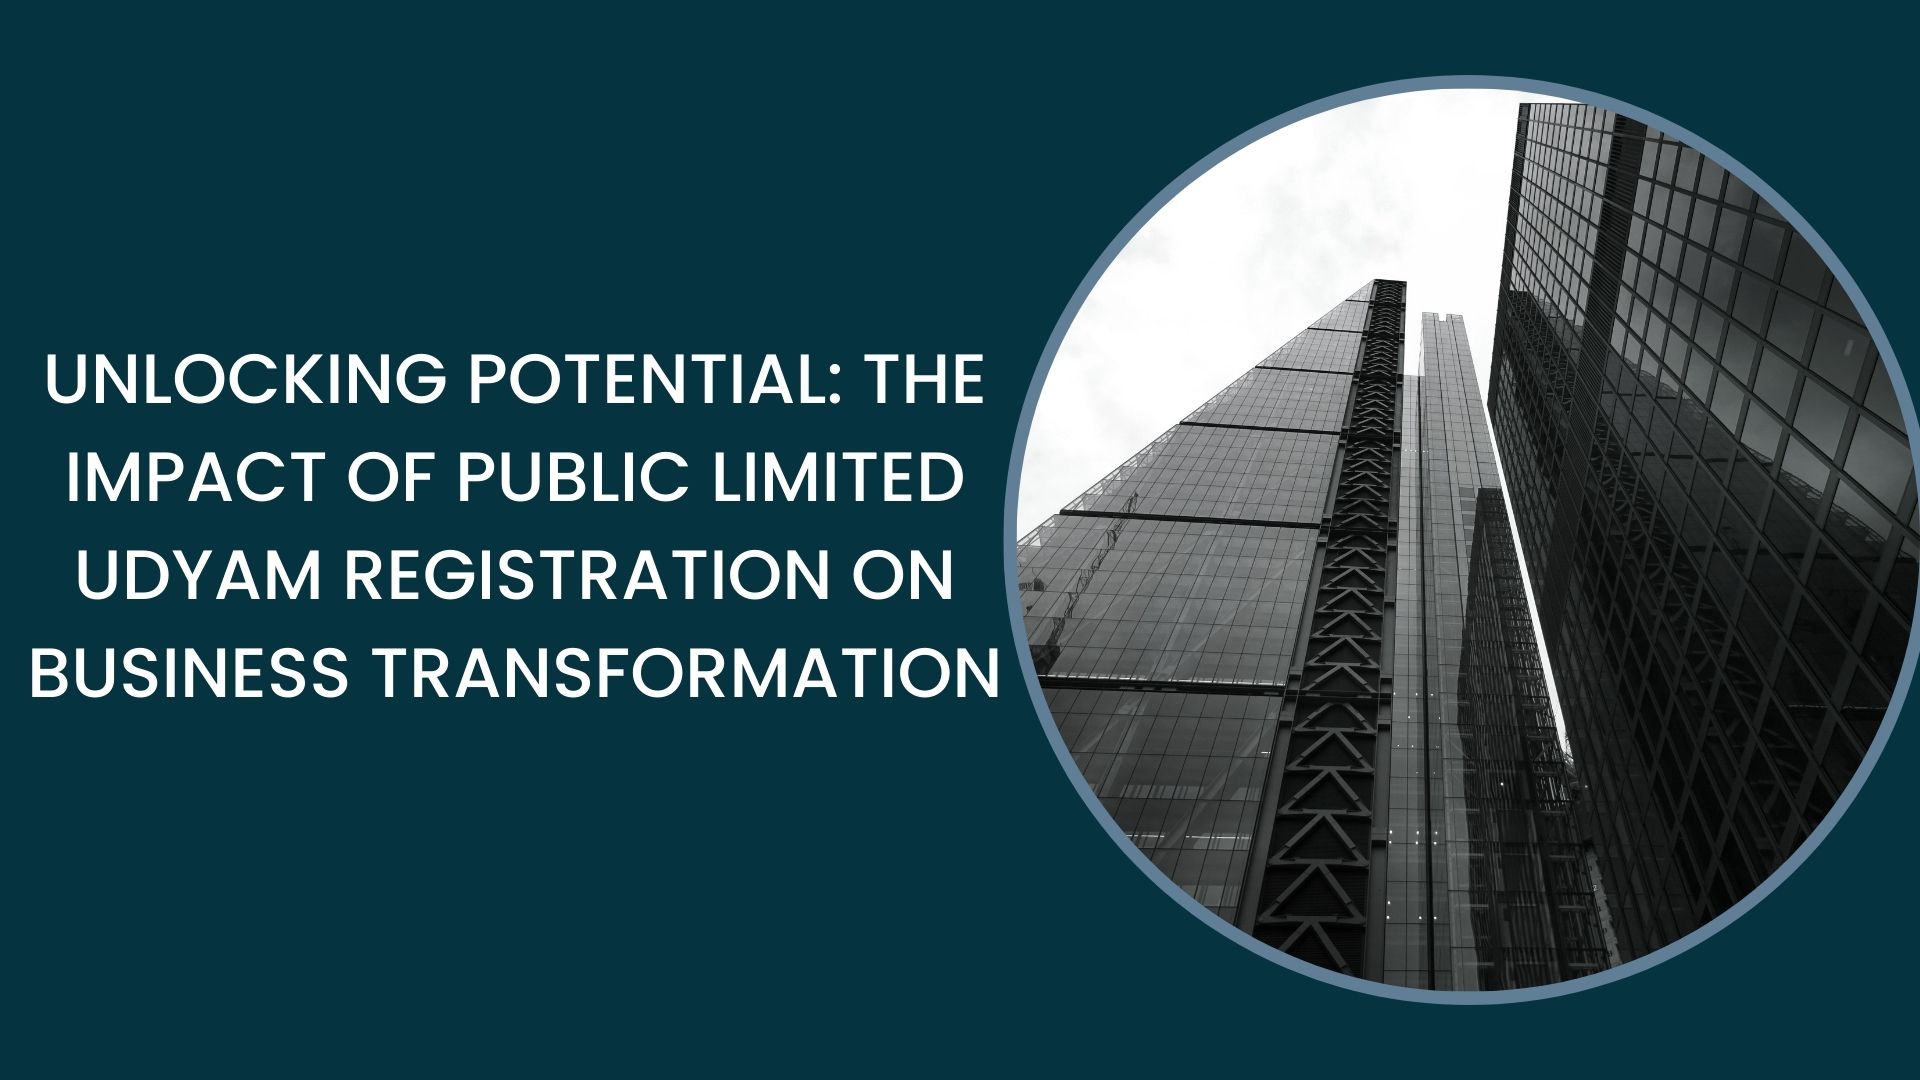 Unlocking Potential: The Impact of Public Limited Udyam Registration on Business Transformation